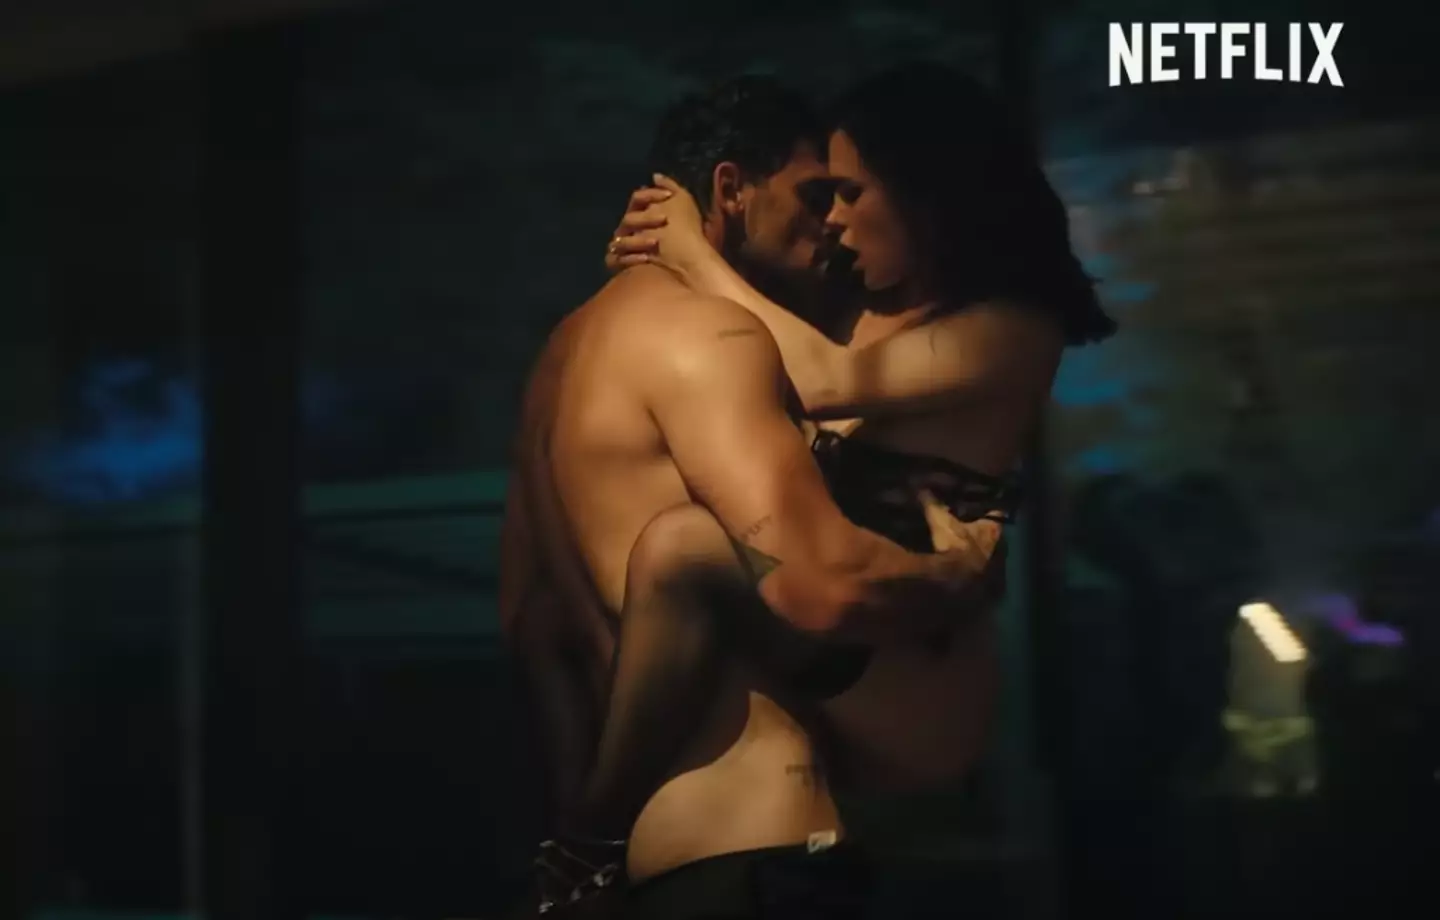 After watching the trailer, which certainly looks as saucy as the first movie - fans have been blown away (